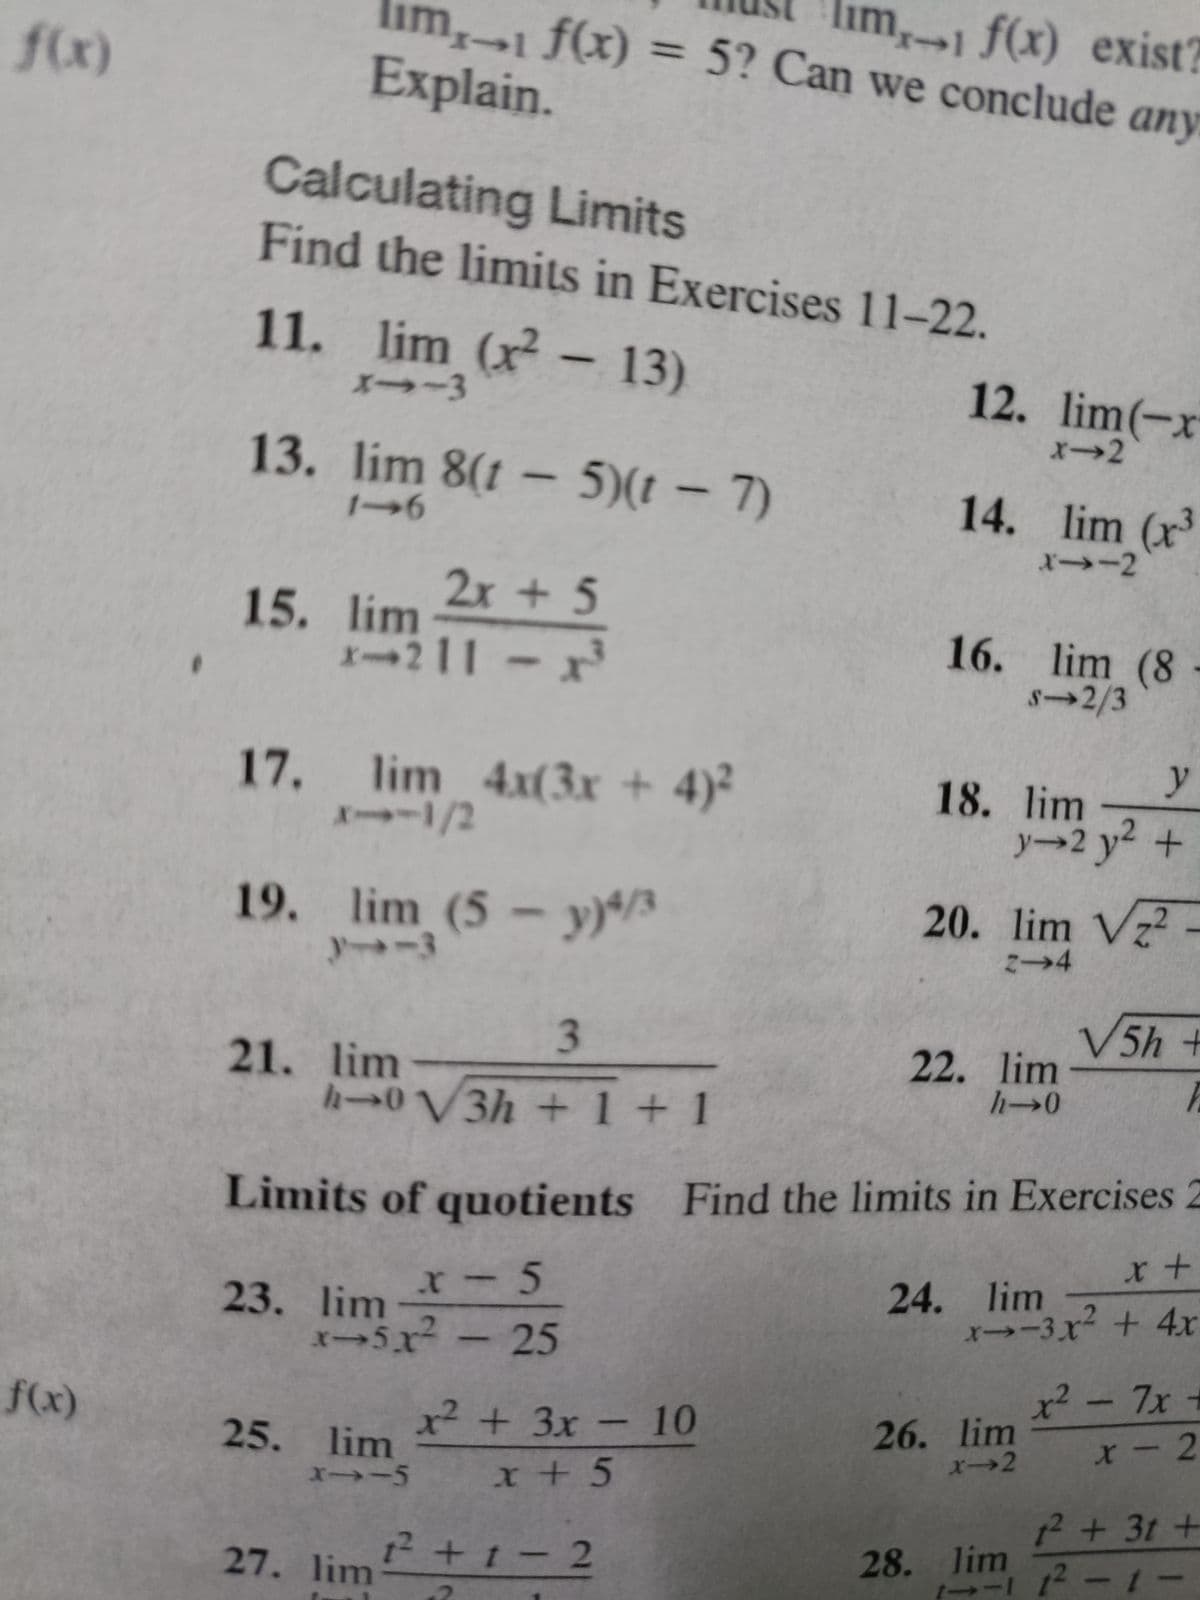 lim1 f(x) exist?
im,1 f(x) = 5? Can we conclude any
Explain.
f(x)
%3D
Calculating Limits
Find the limits in Exercises 11-22.
11. lim (x – 13)
メ→-3
12. lim(-x
x→2
13. lim 8(1 – 5)(t – 7)
14. lim (x
X→-2
2x + 5
15. lim
X→211
16. lim (8
8→2/3
y
17. lim 4x(3x + 4)²
XI1/2
18. lim
y→2 y2 +
19. lim (5 - y)*/3
-3
20. lim Vz?
こ→4
3.
V5h+
21. lim
h→0V3h+1+ 1
22. lim
h→0
Limits of quotients Find the limits in Exercises 2
23. lim-
5x-25
24. lim
x→-3x² + 4x
2 - 7x +
x²
26. lim
x→2
f(x)
x² +3x- 10
25. lim
X-2
12+3t +
12 +t- 2
28. lim
27. lim
--I -t-
